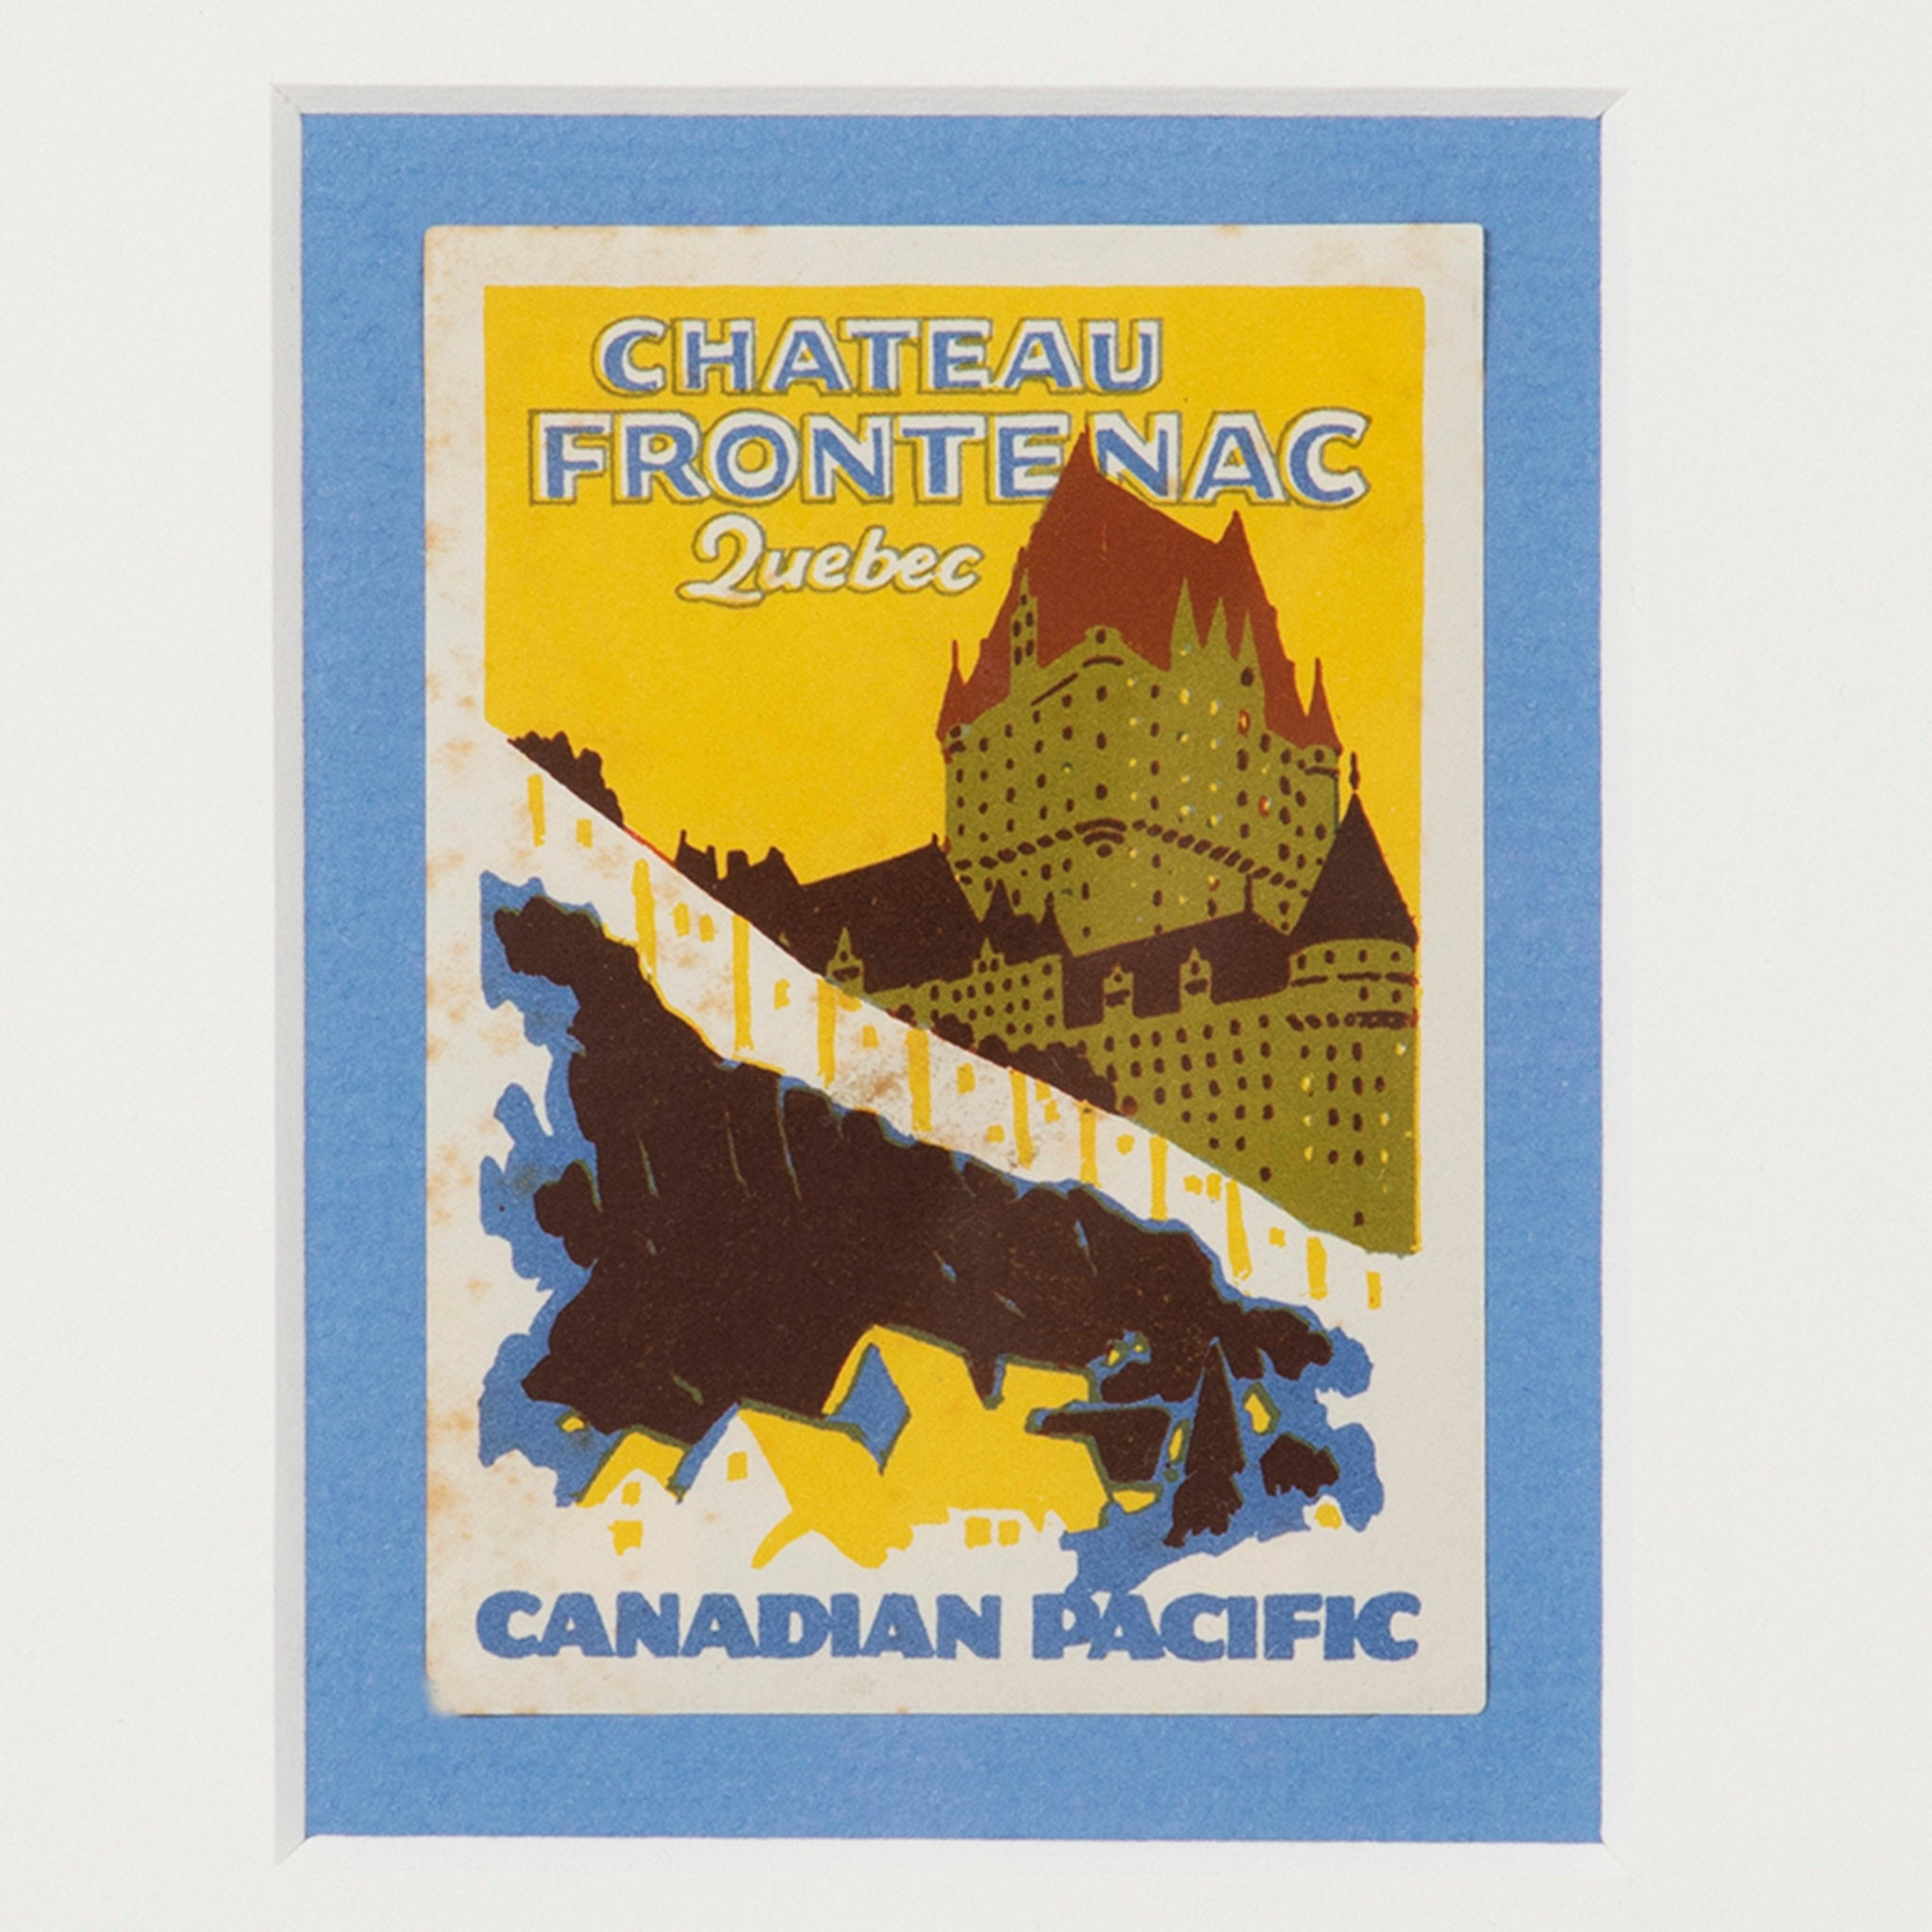 Château Frontenac Quebec Canadian Pacific Luggage Label